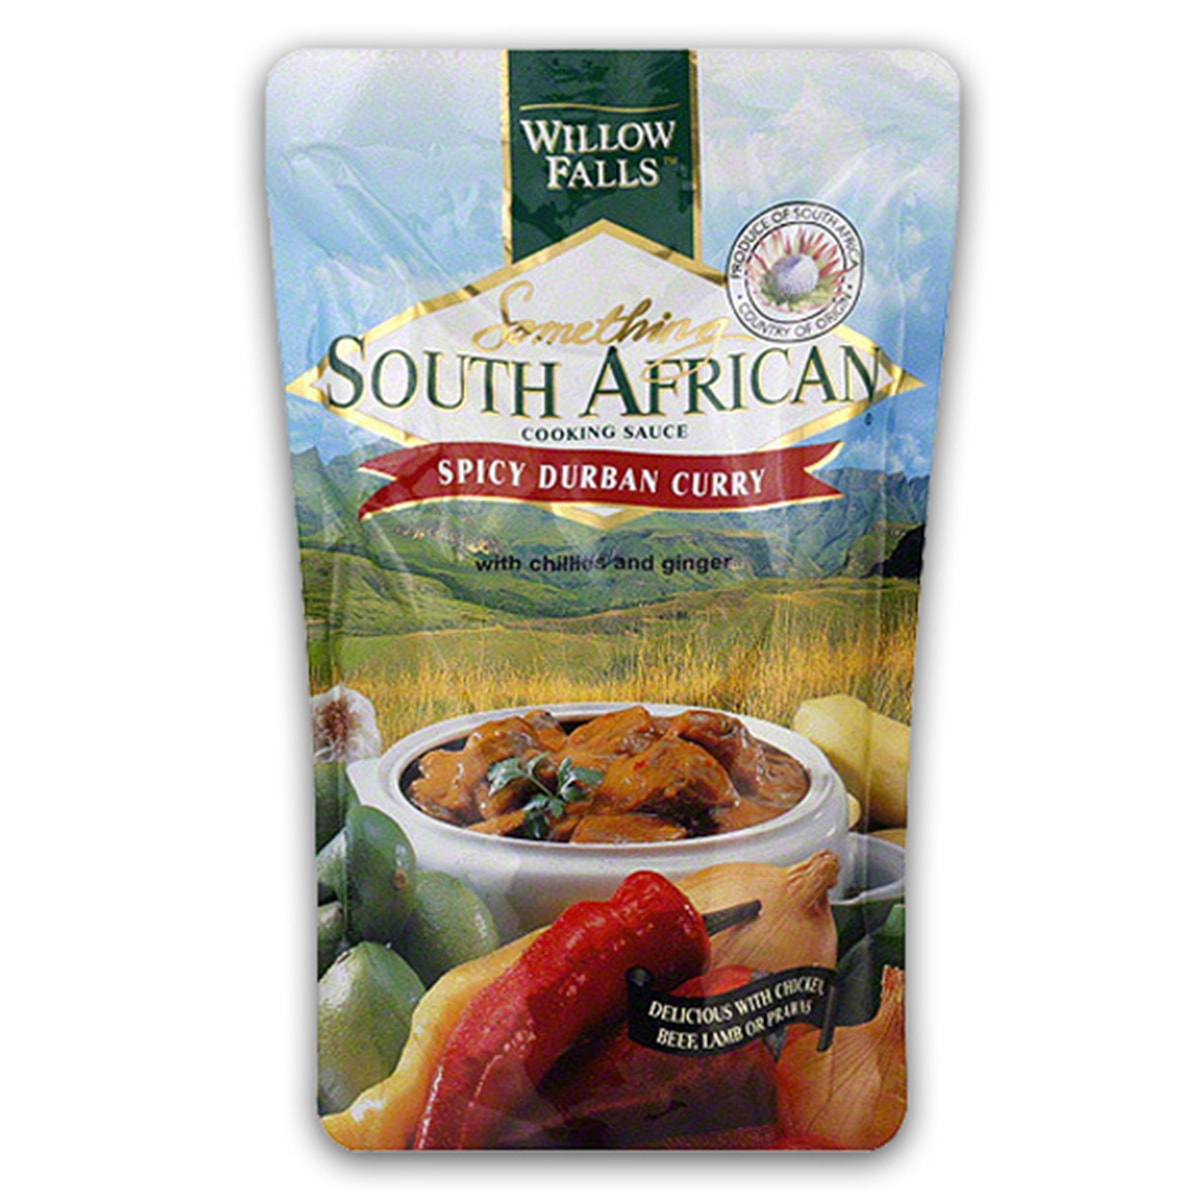 Buy Something South African Spicy Durban Curry Cooking Sauce - 400 gm